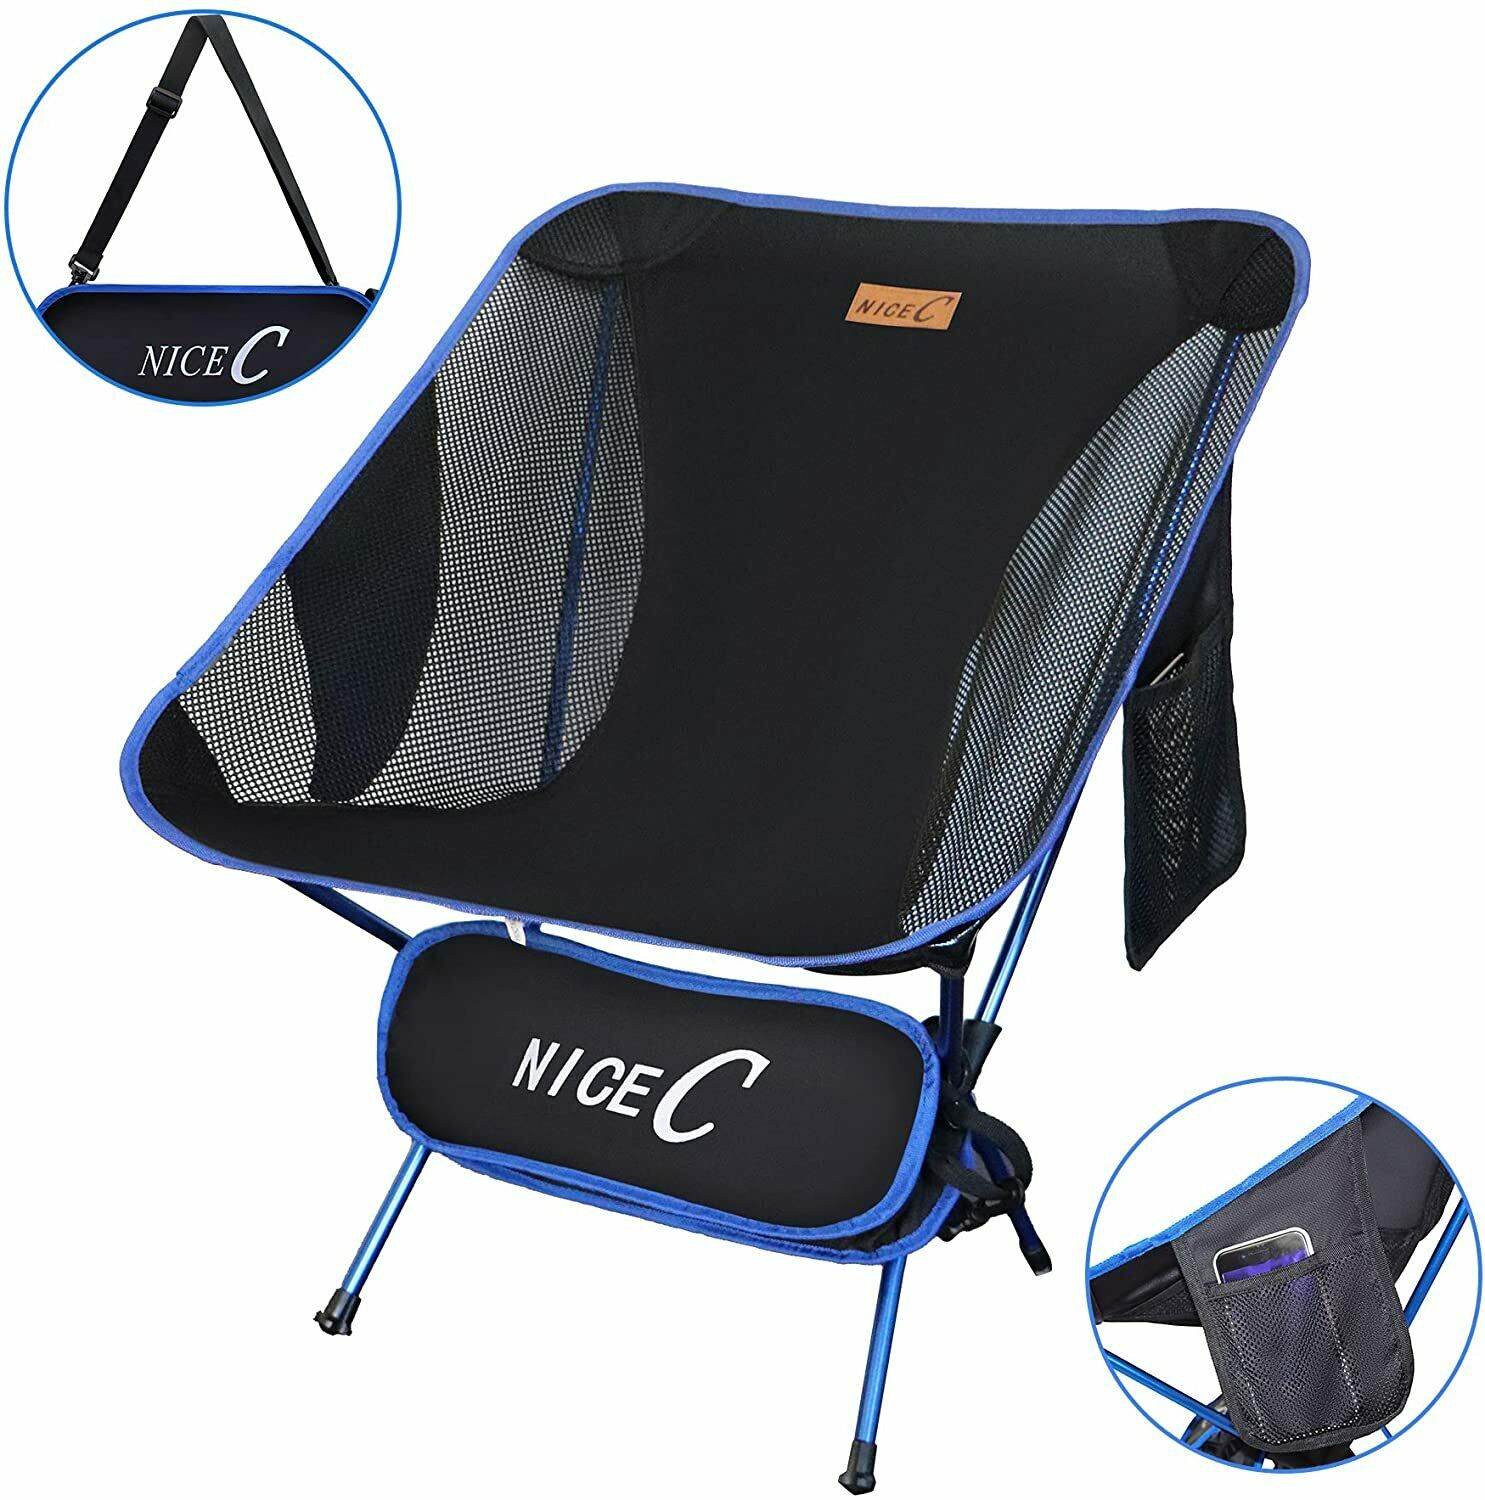 NiceC Ultralight Portable Folding Backpacking Camping Chair with 2 Storage Bags